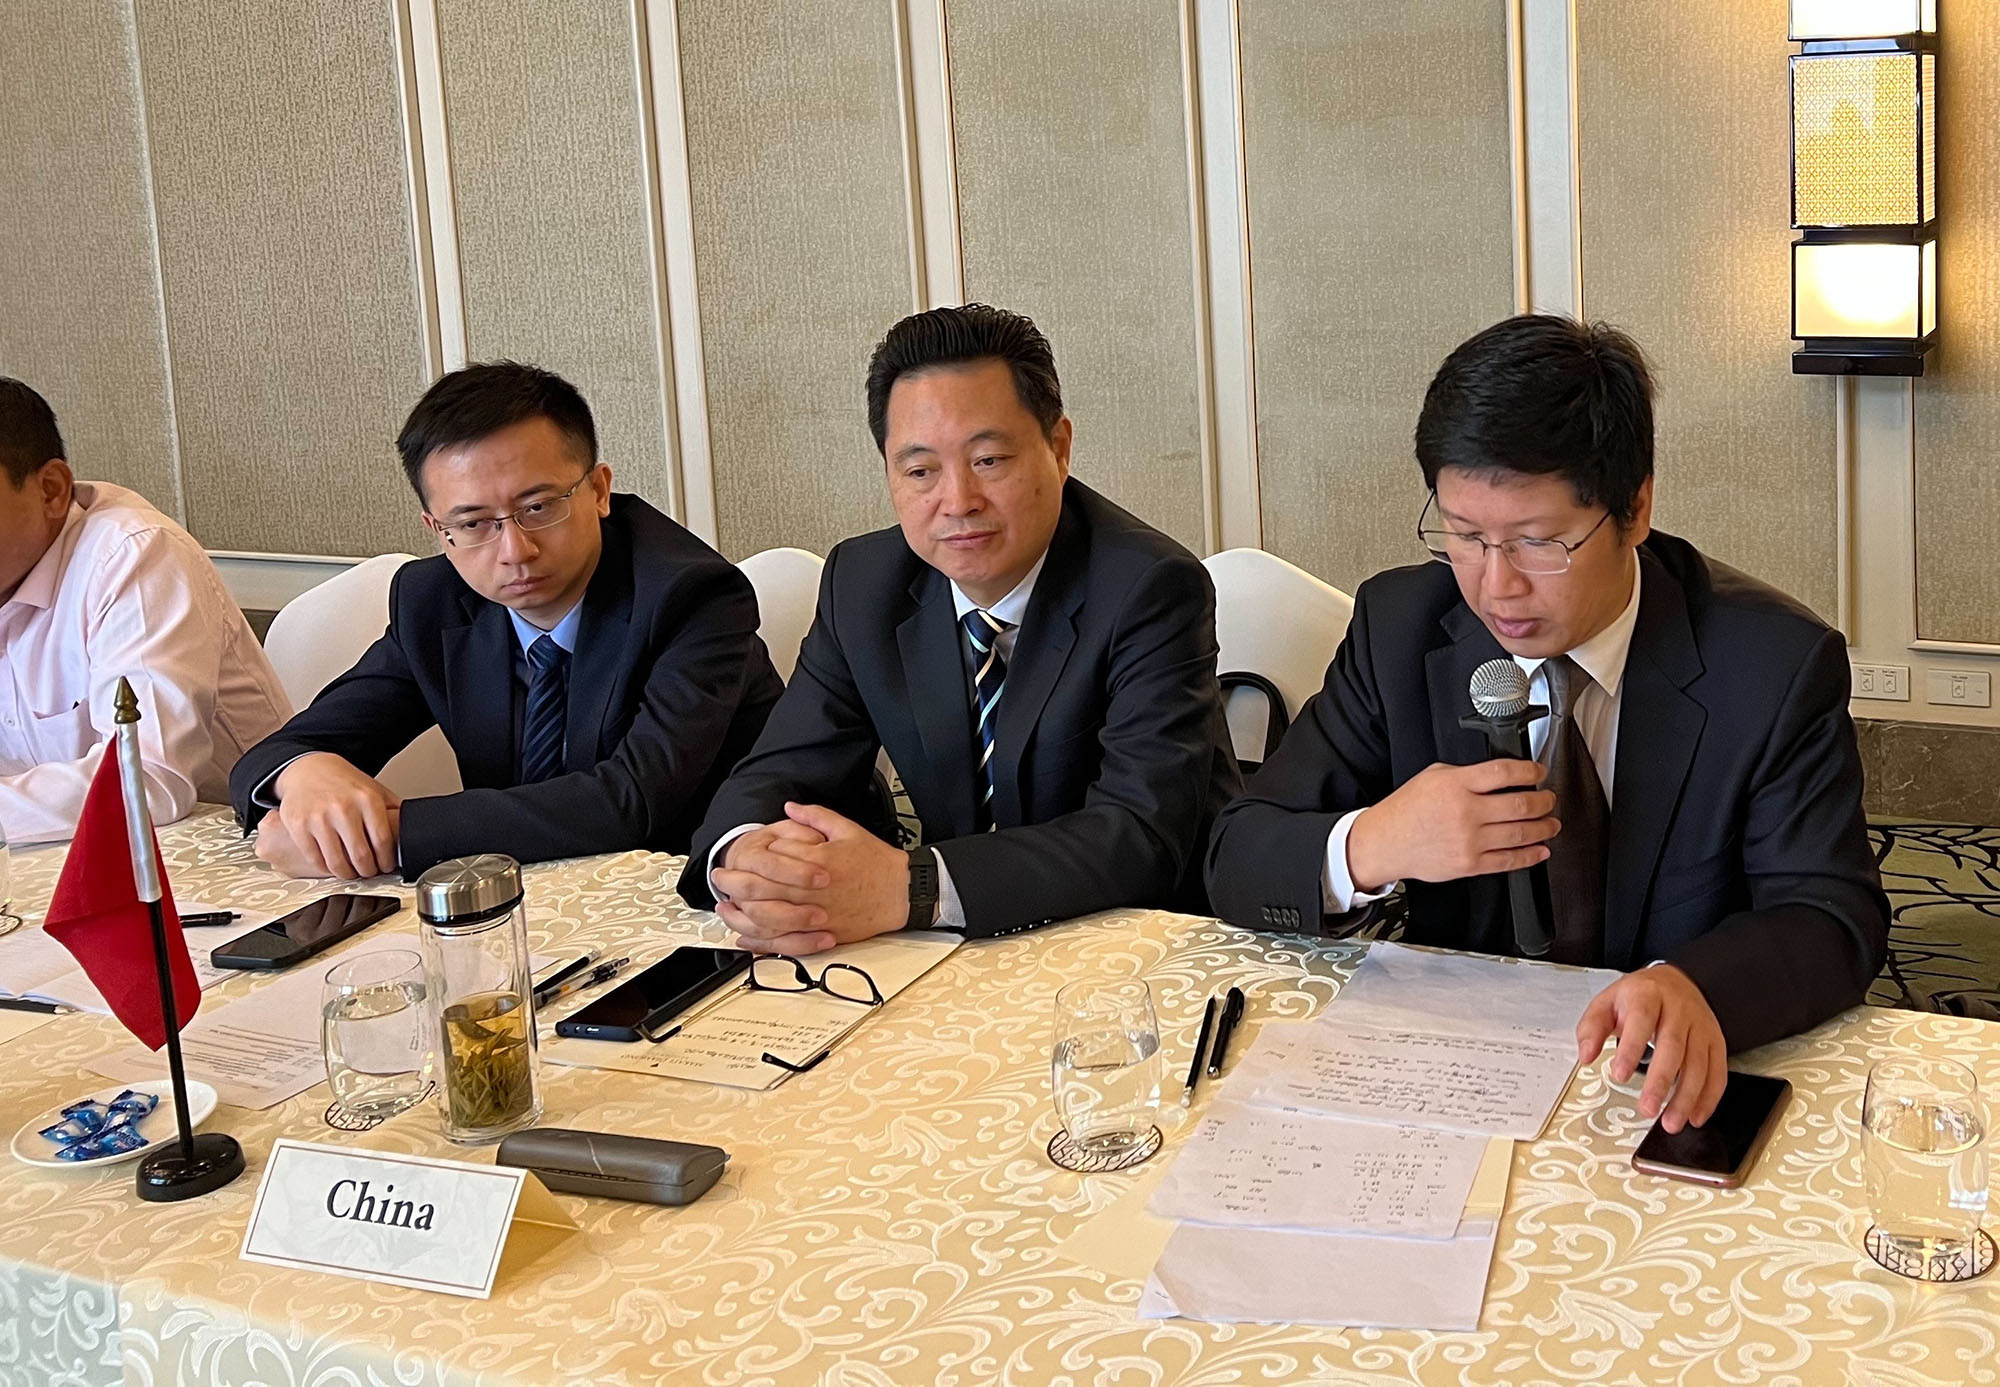 Meng Xin, Deputy Director, Drug Analysis Division I, of the Chinese National Narcotics Laboratory and Drug Intelligence and Forensic Center sharing information on newly identified new psychoactive substances in China